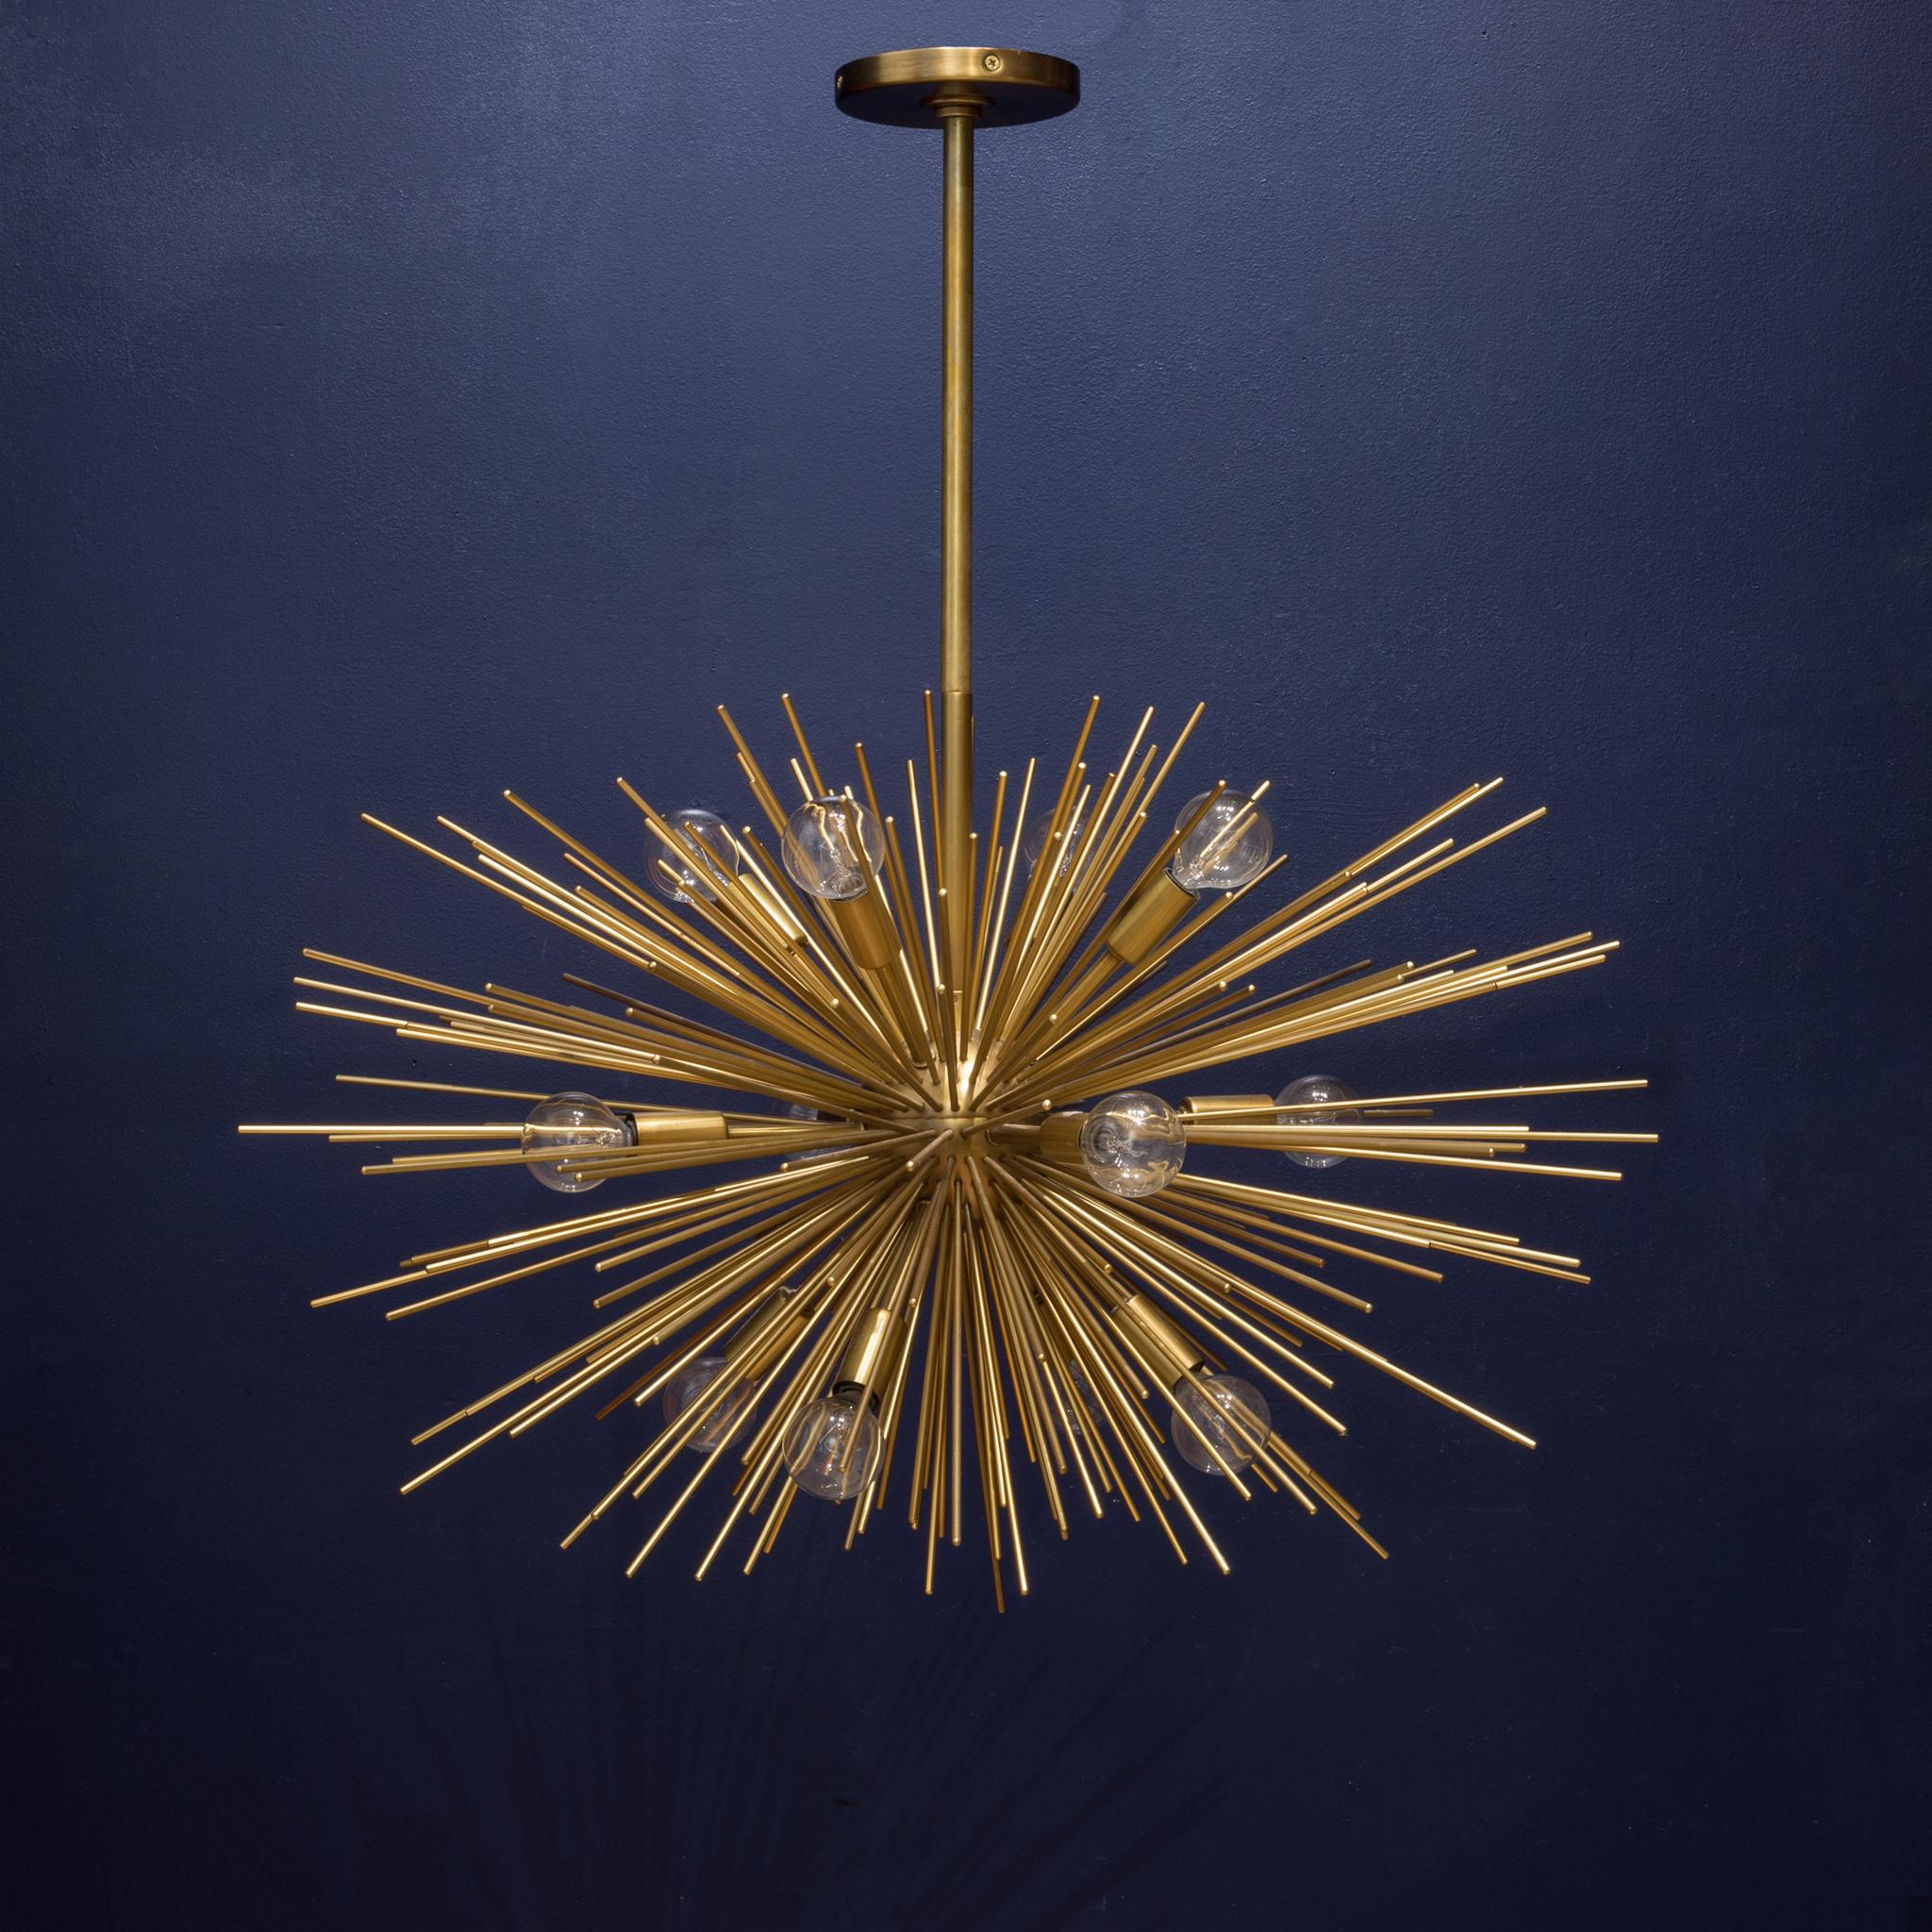 About

Modern sphere shaped starburst motif 12-light iron chandelier in antique brass finish. Includes cylindrical ceiling mount and (1) 6” and (3) 12” rods. The 12